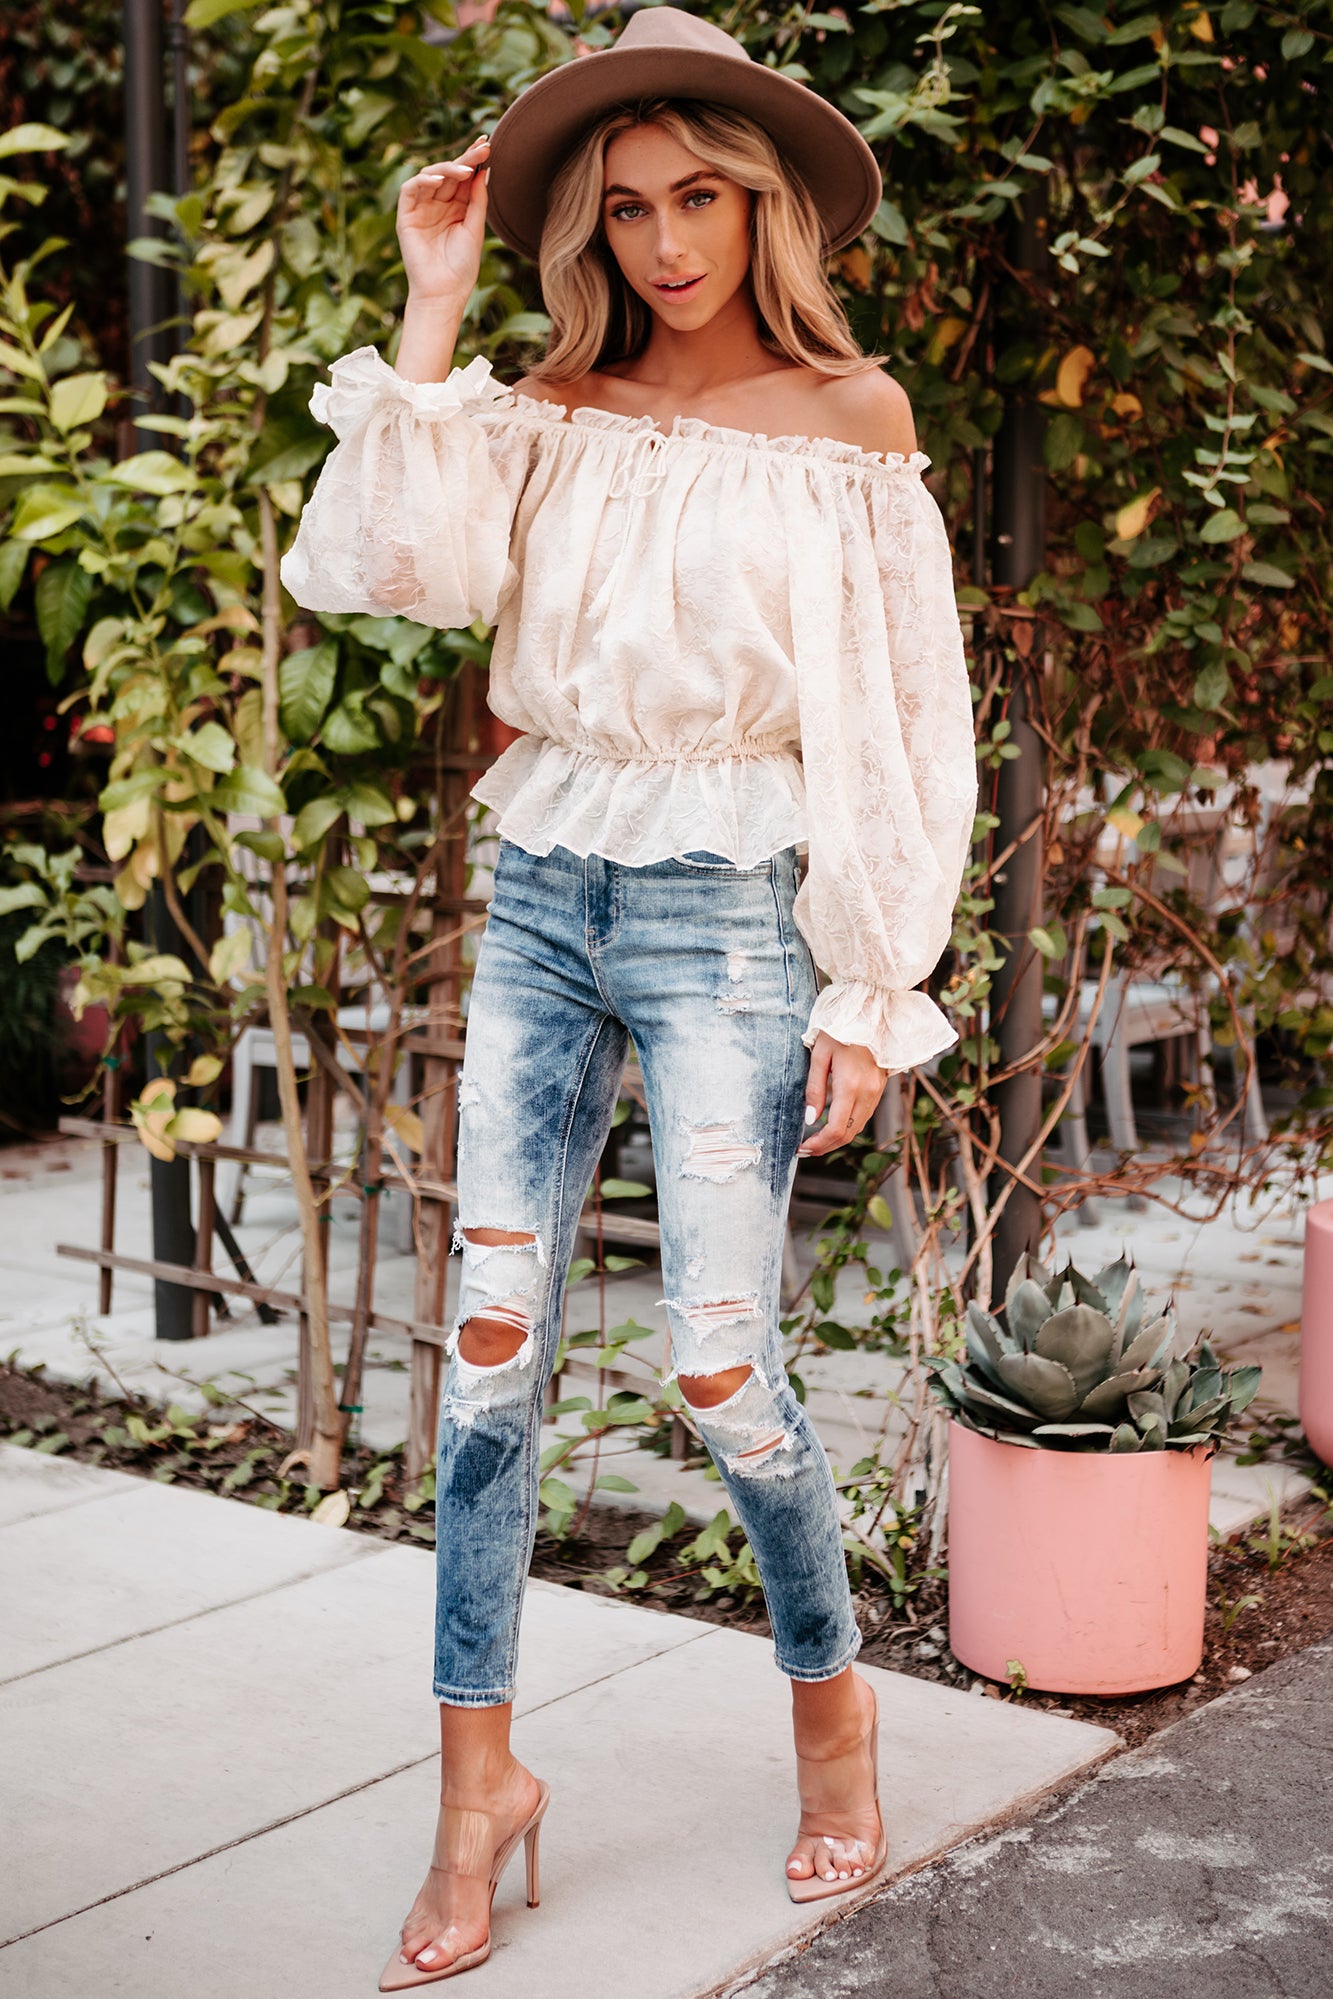 Forever Your Sweetheart Floral Textured Off The Shoulder Top (Ivory) - NanaMacs